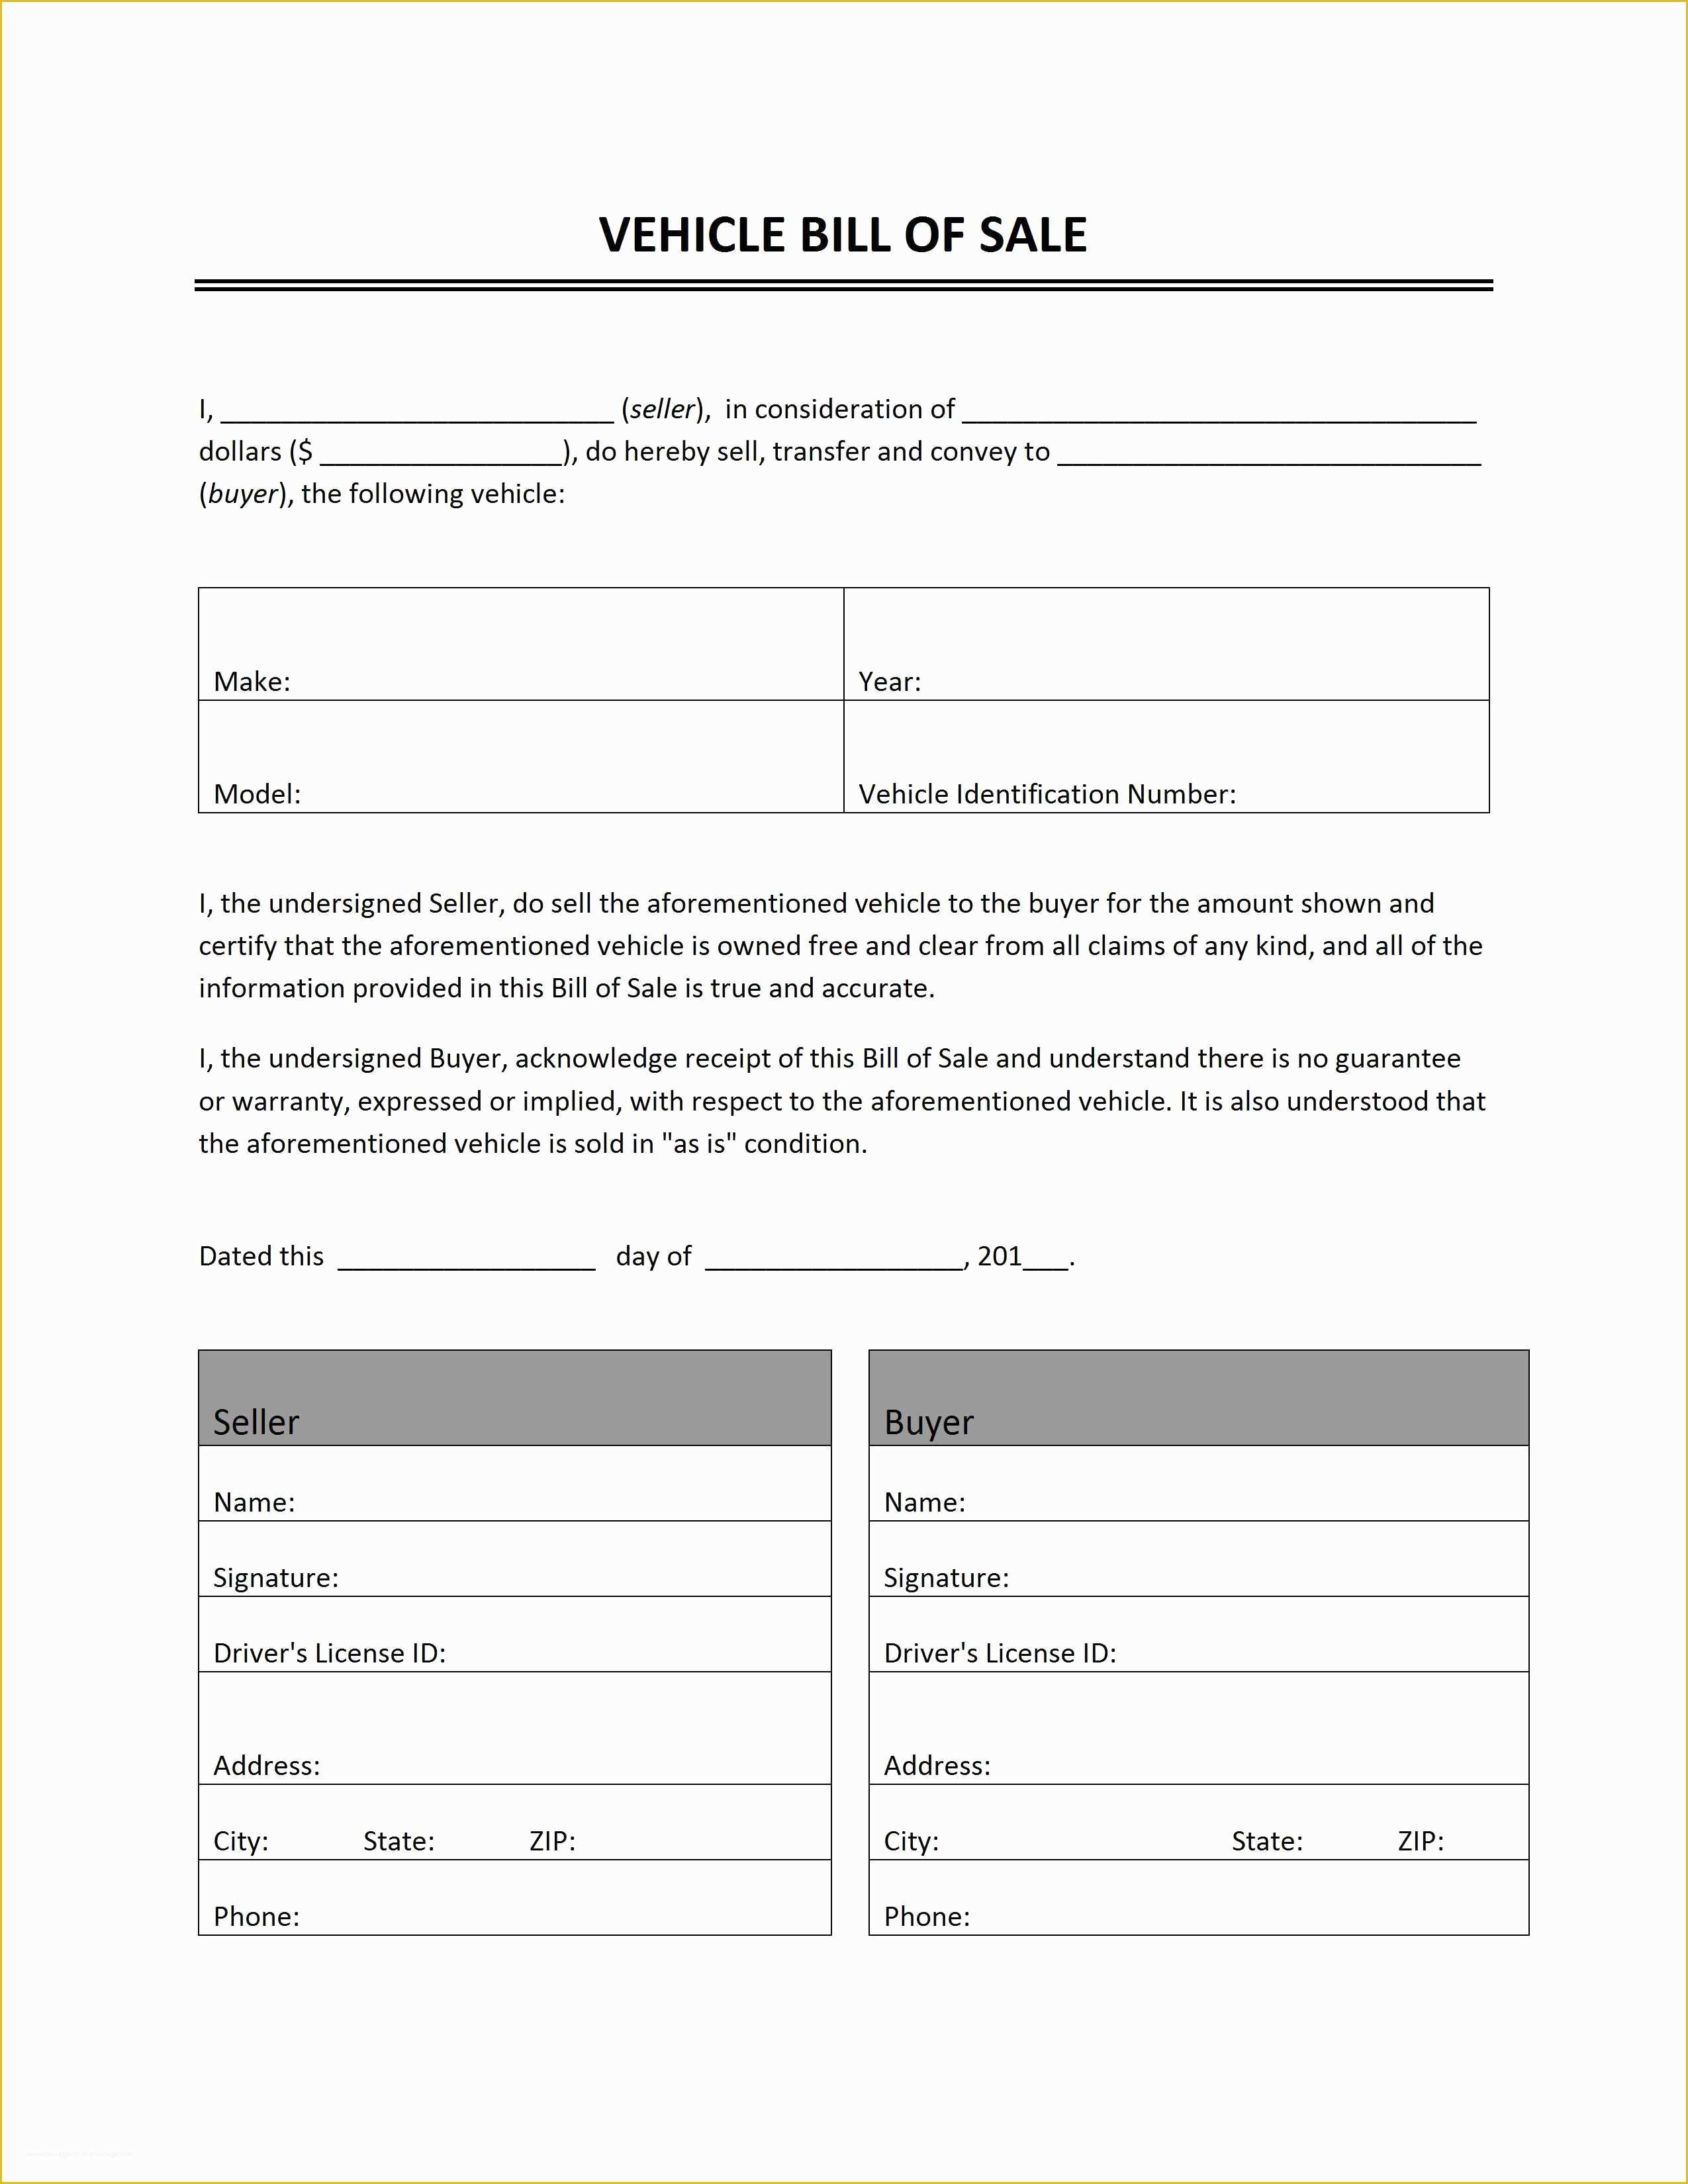 Free Vehicle Bill Of Sale Template Word Of Printable Sample Car Bill Of Sale form